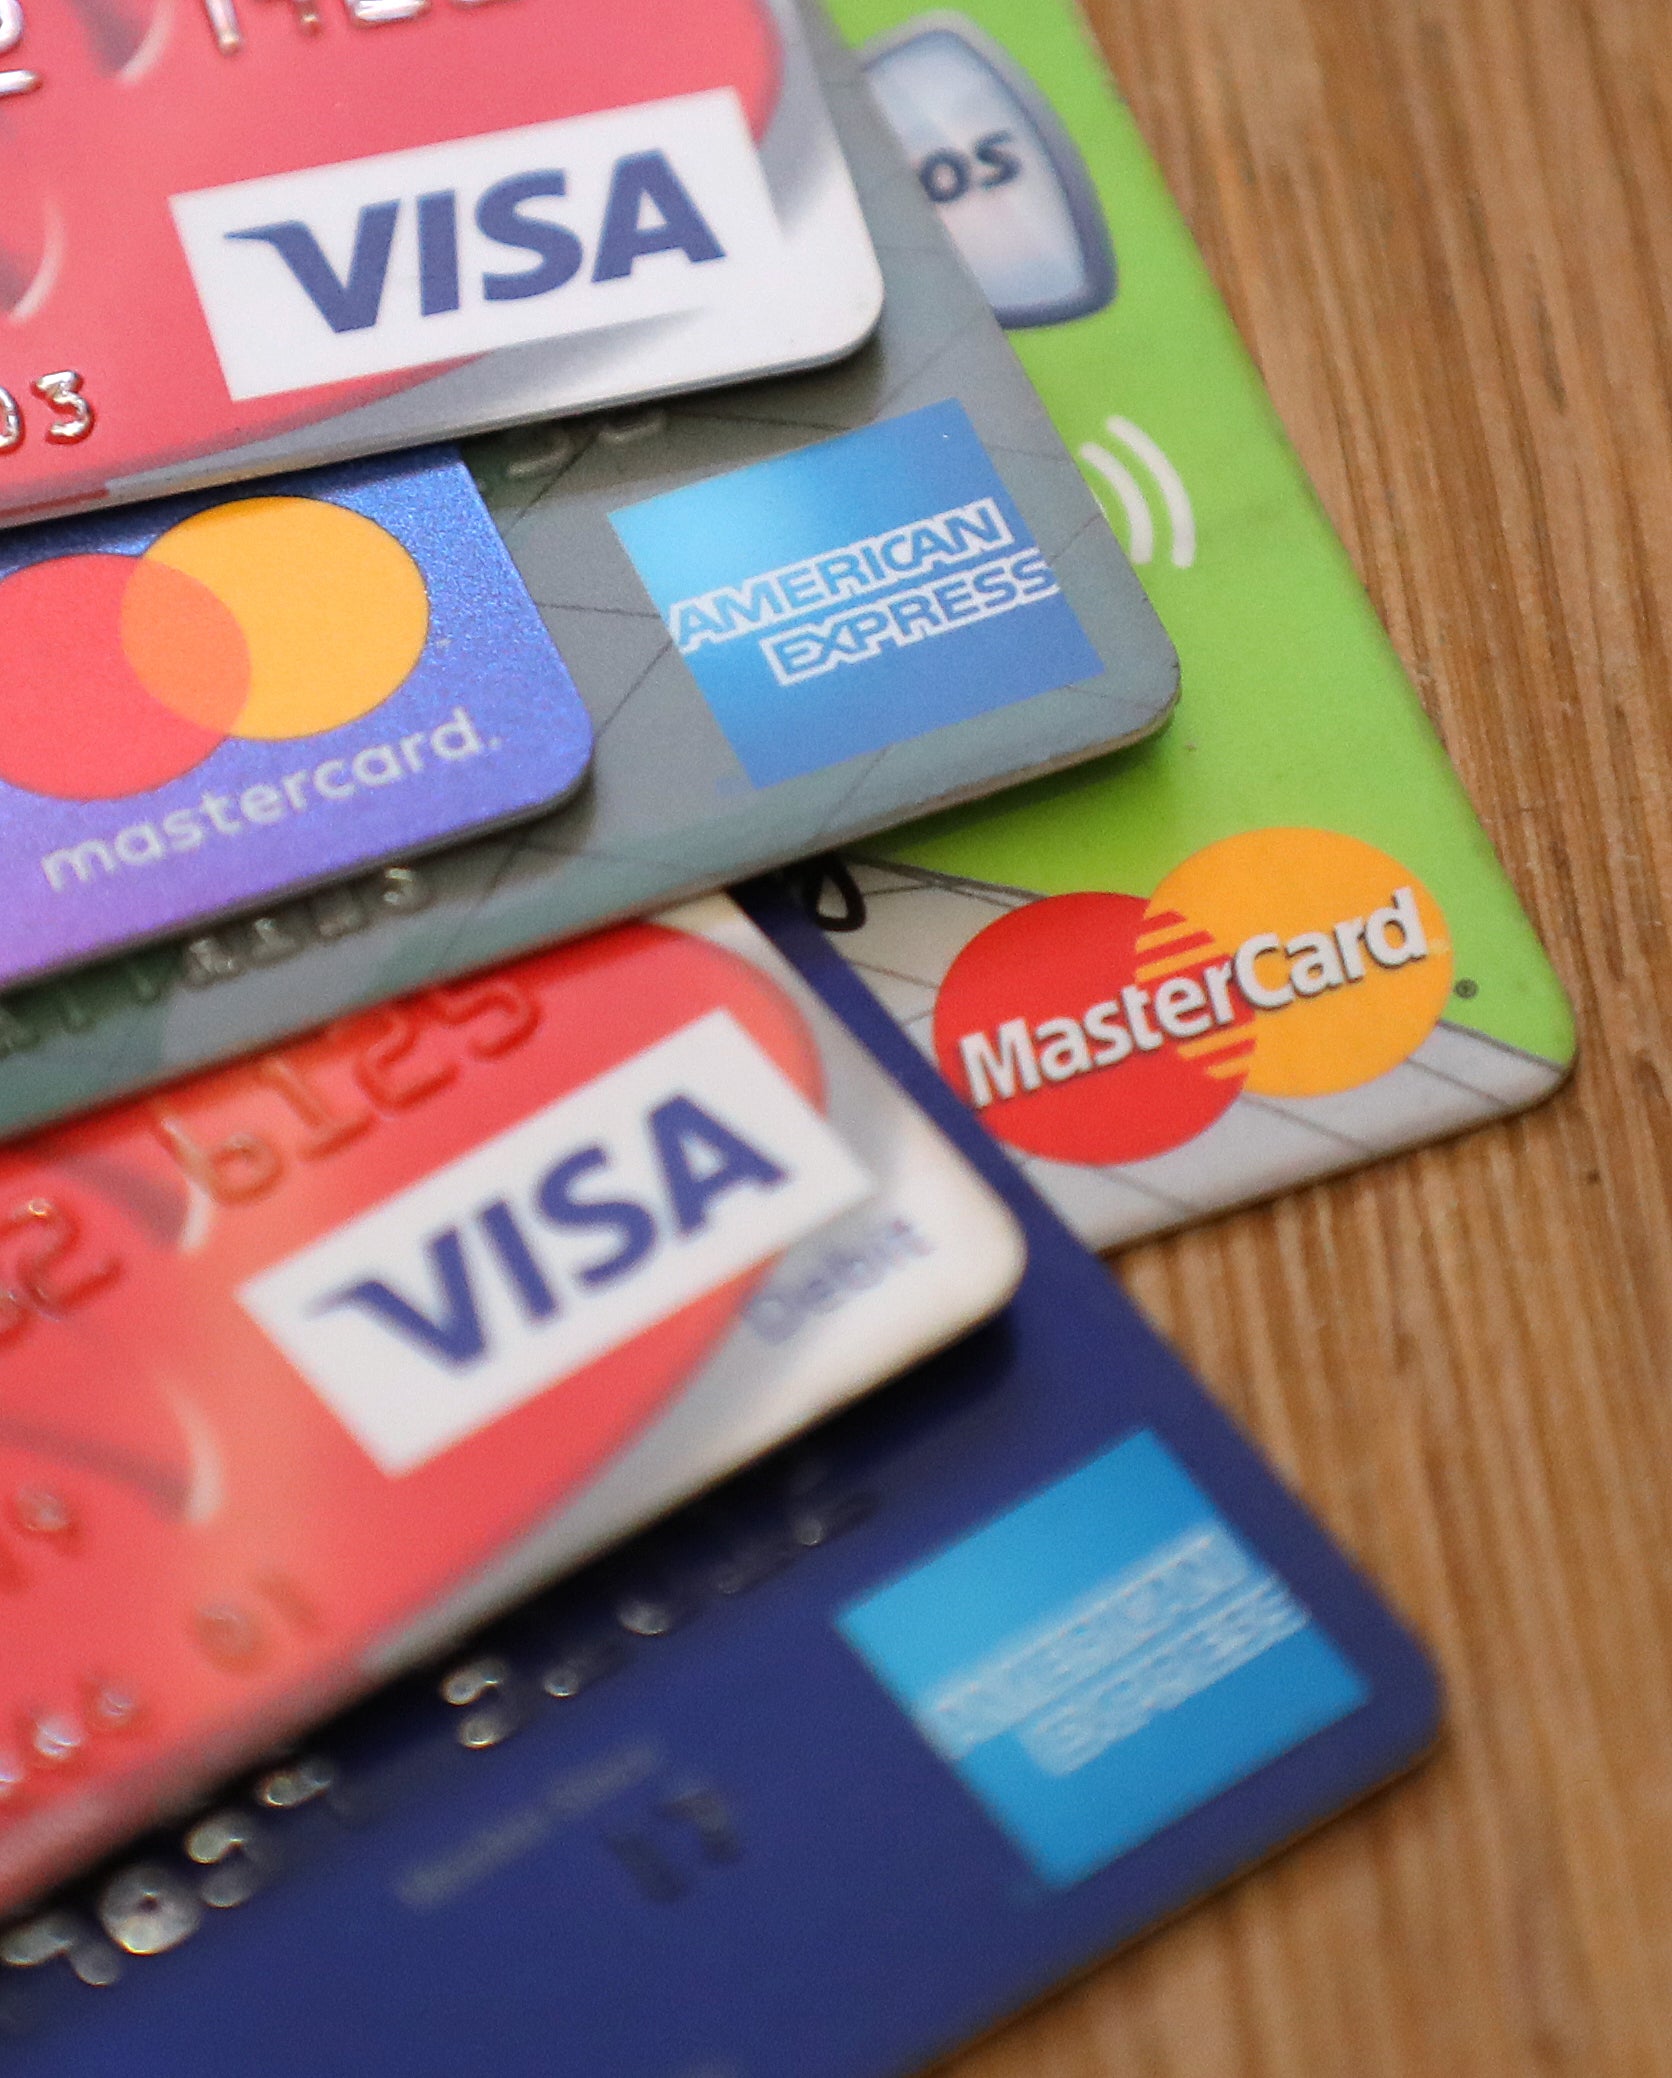 The average introductory interest-free period being offered on balance transfer credit cards has surpassed 600 days for the first time in nearly four years, according to Moneyfacts.co.uk (Andrew Matthews/PA)